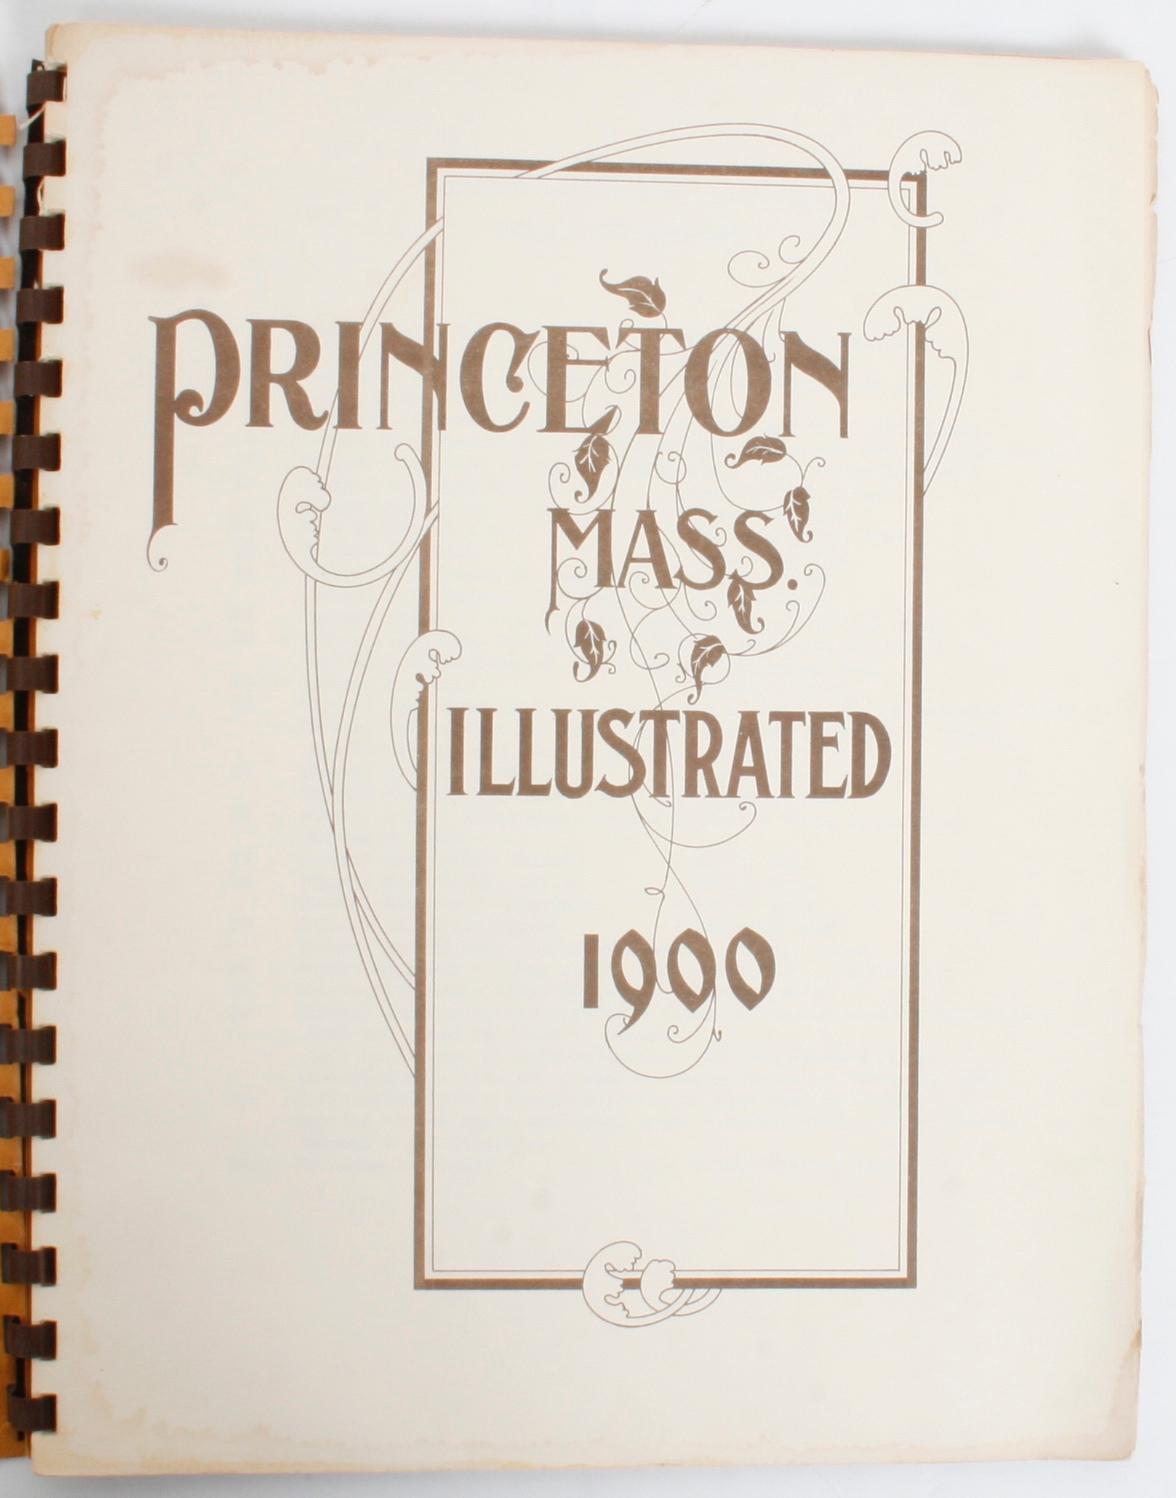 Princeton Mass. Illustrated 1900. Gardner: Gardner News Co., 1972. Ring bound softcover. 32 pp. A reproduction of a publication originally printed in 1900 of the historical and pictorial account of Princeton Massachusetts with supplemental 